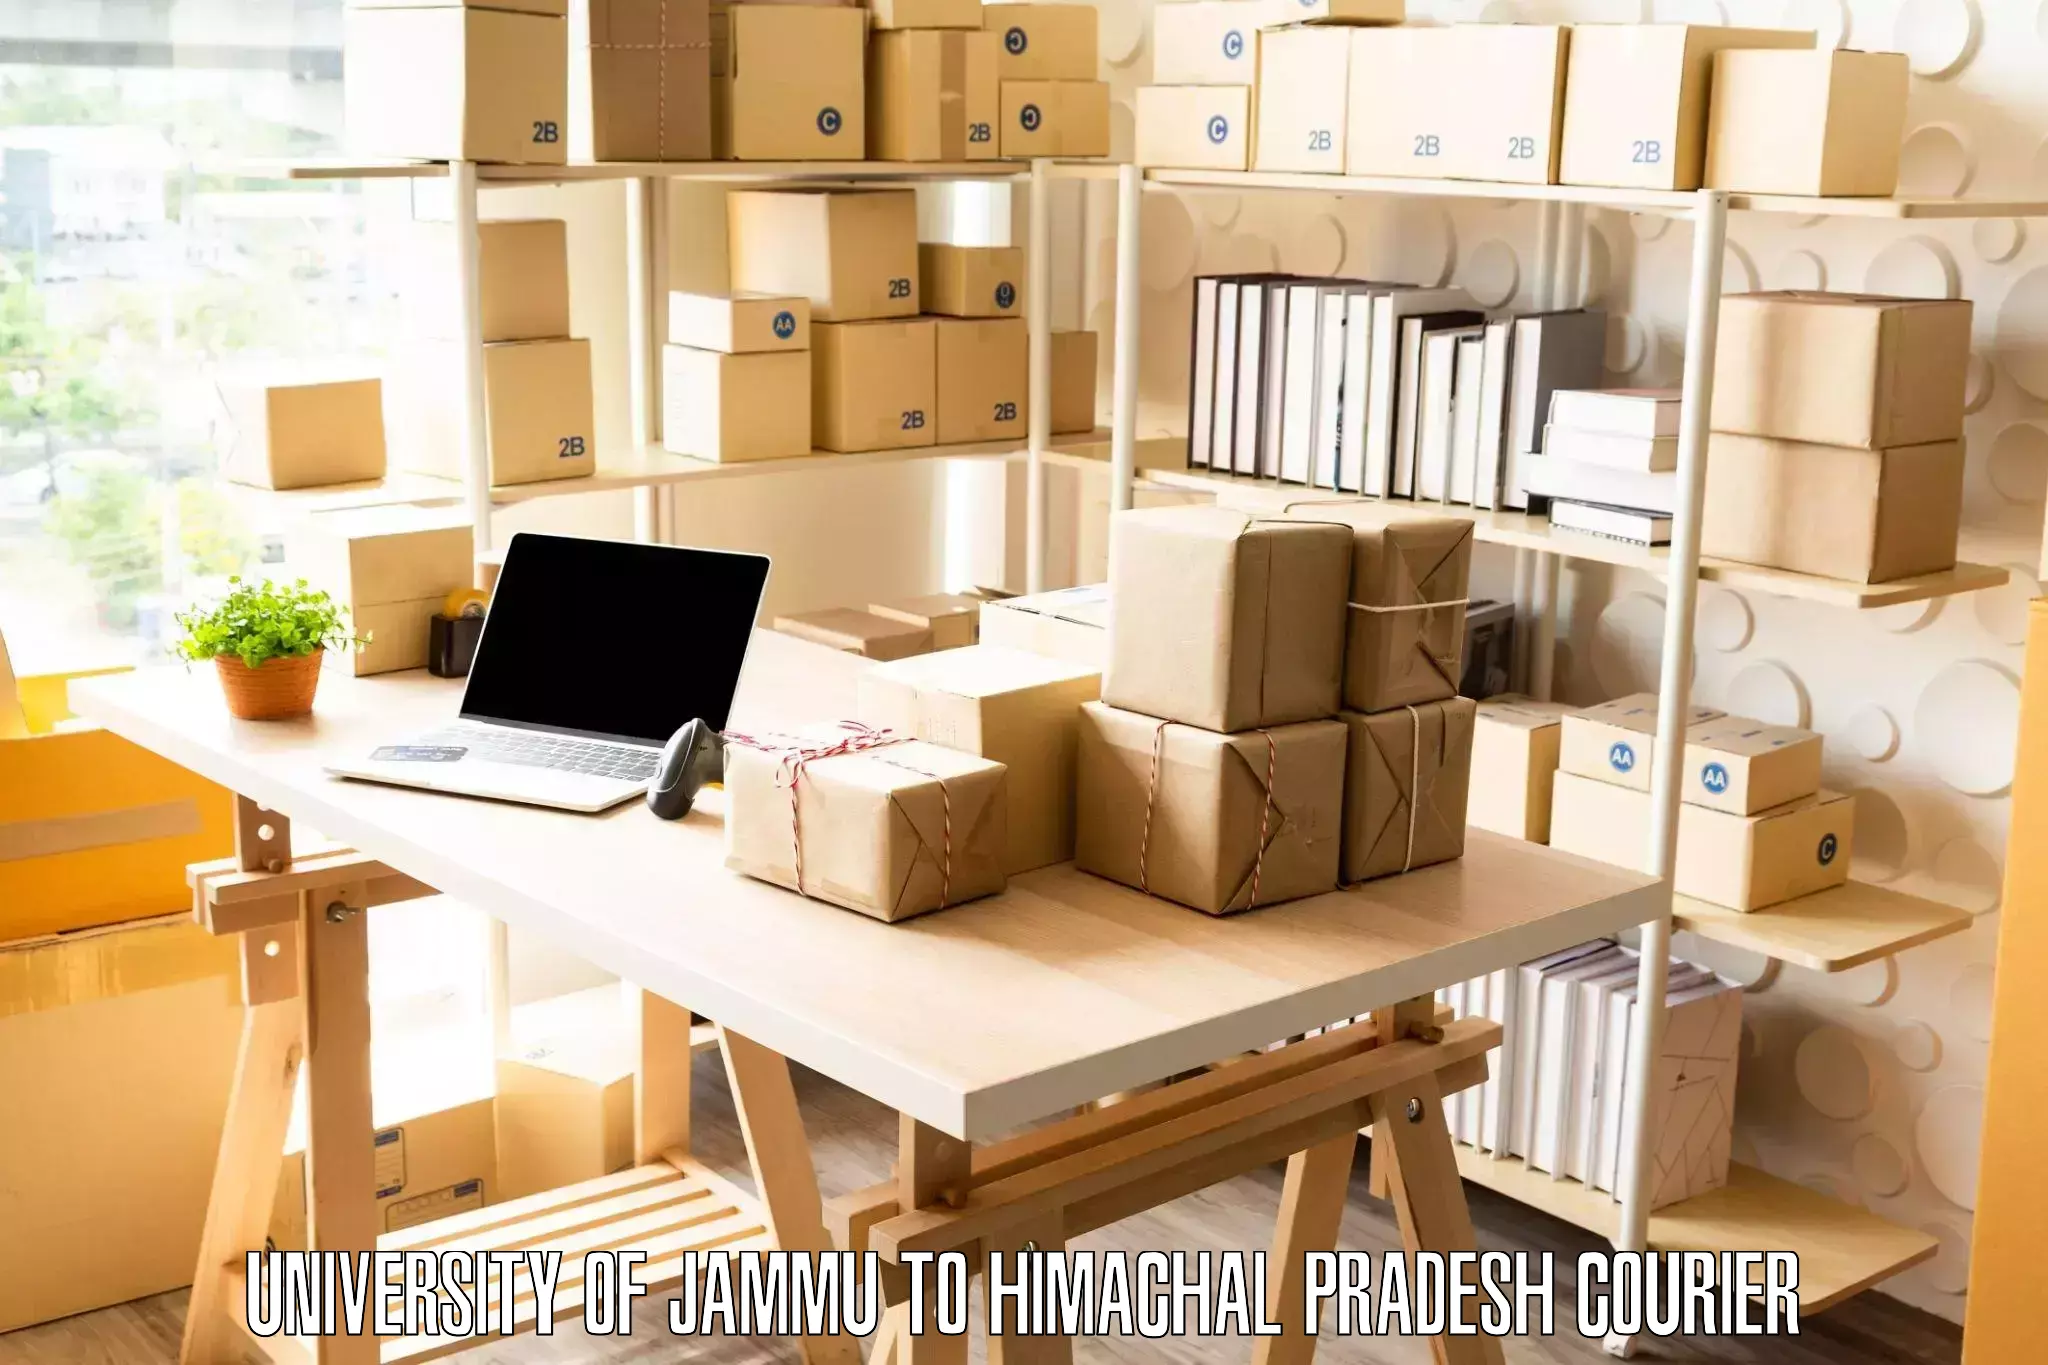 Moving and storage services in University of Jammu to Una Himachal Pradesh